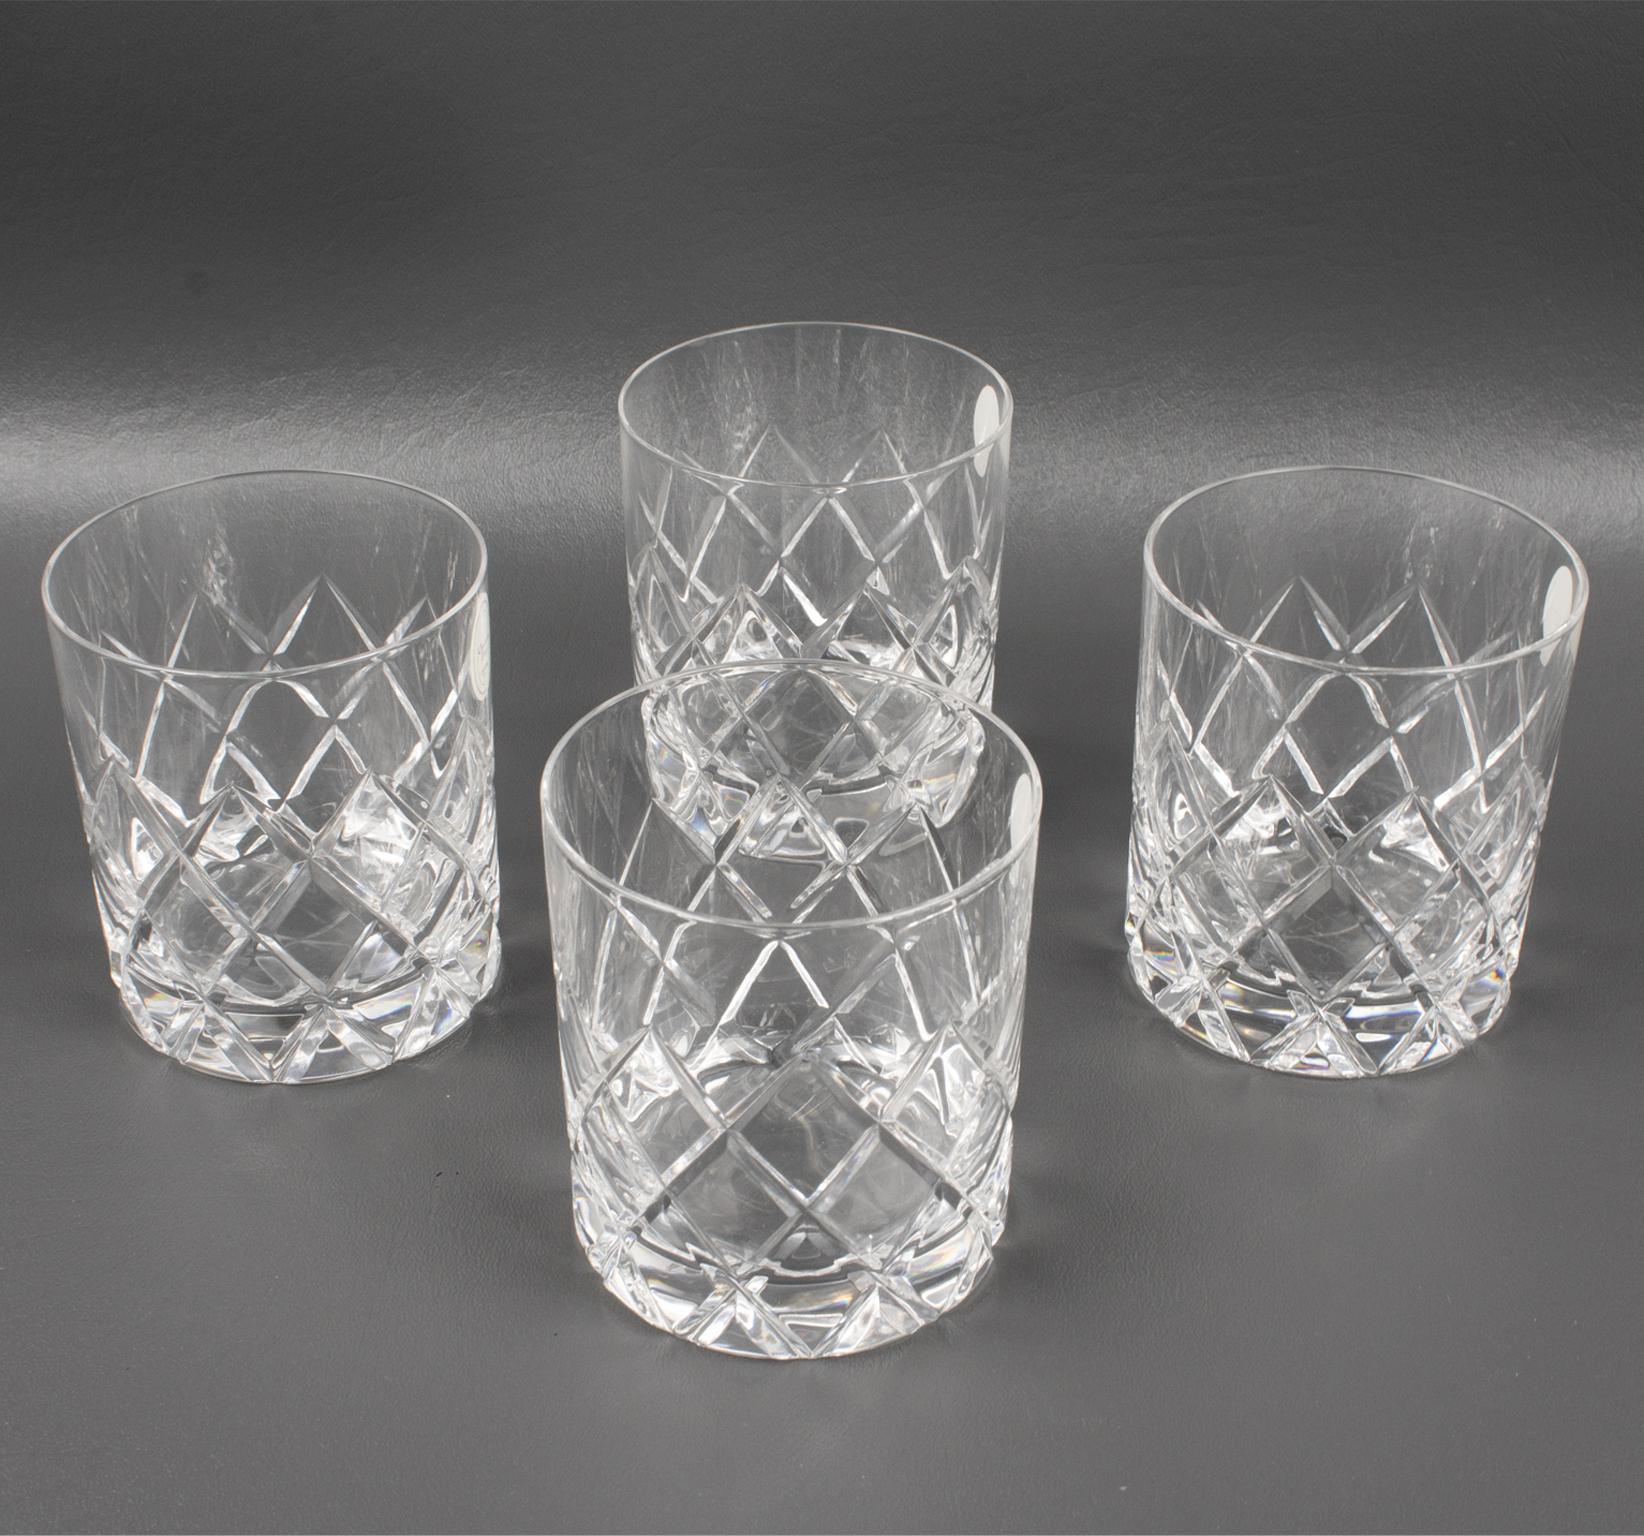 Late 20th Century Christian Dior Crystal Decanter and Glasses Set, 5 pieces in Original Box, 1980s